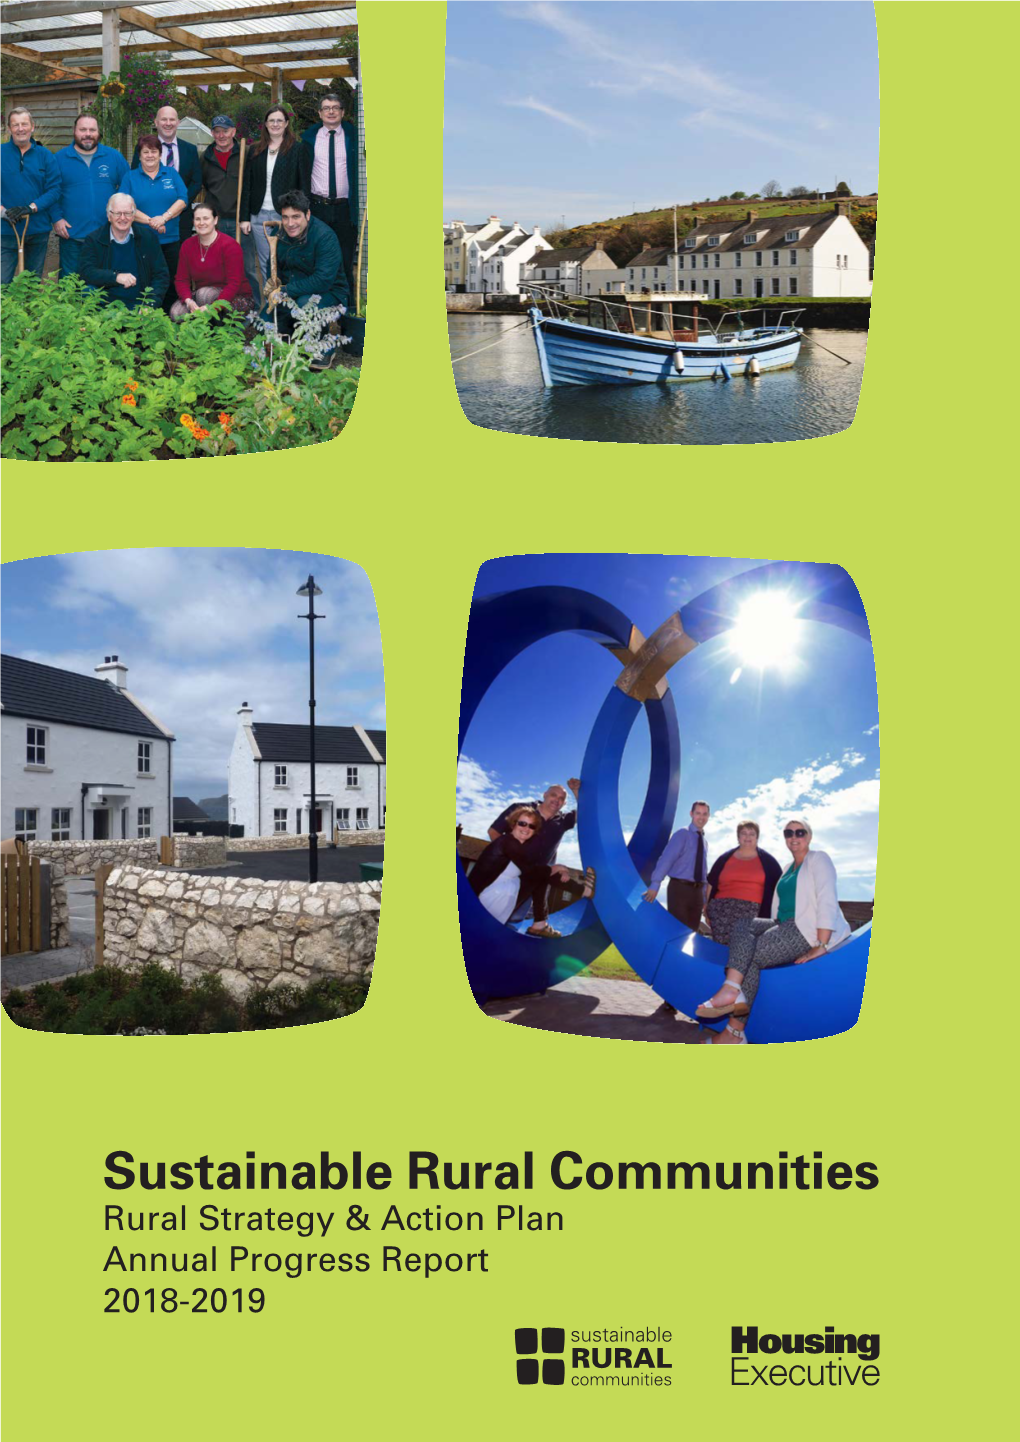 Sustainable Rural Communities Rural Strategy & Action Plan Annual Progress Report 2018-2019 Regeneration Project Cloughey, Co